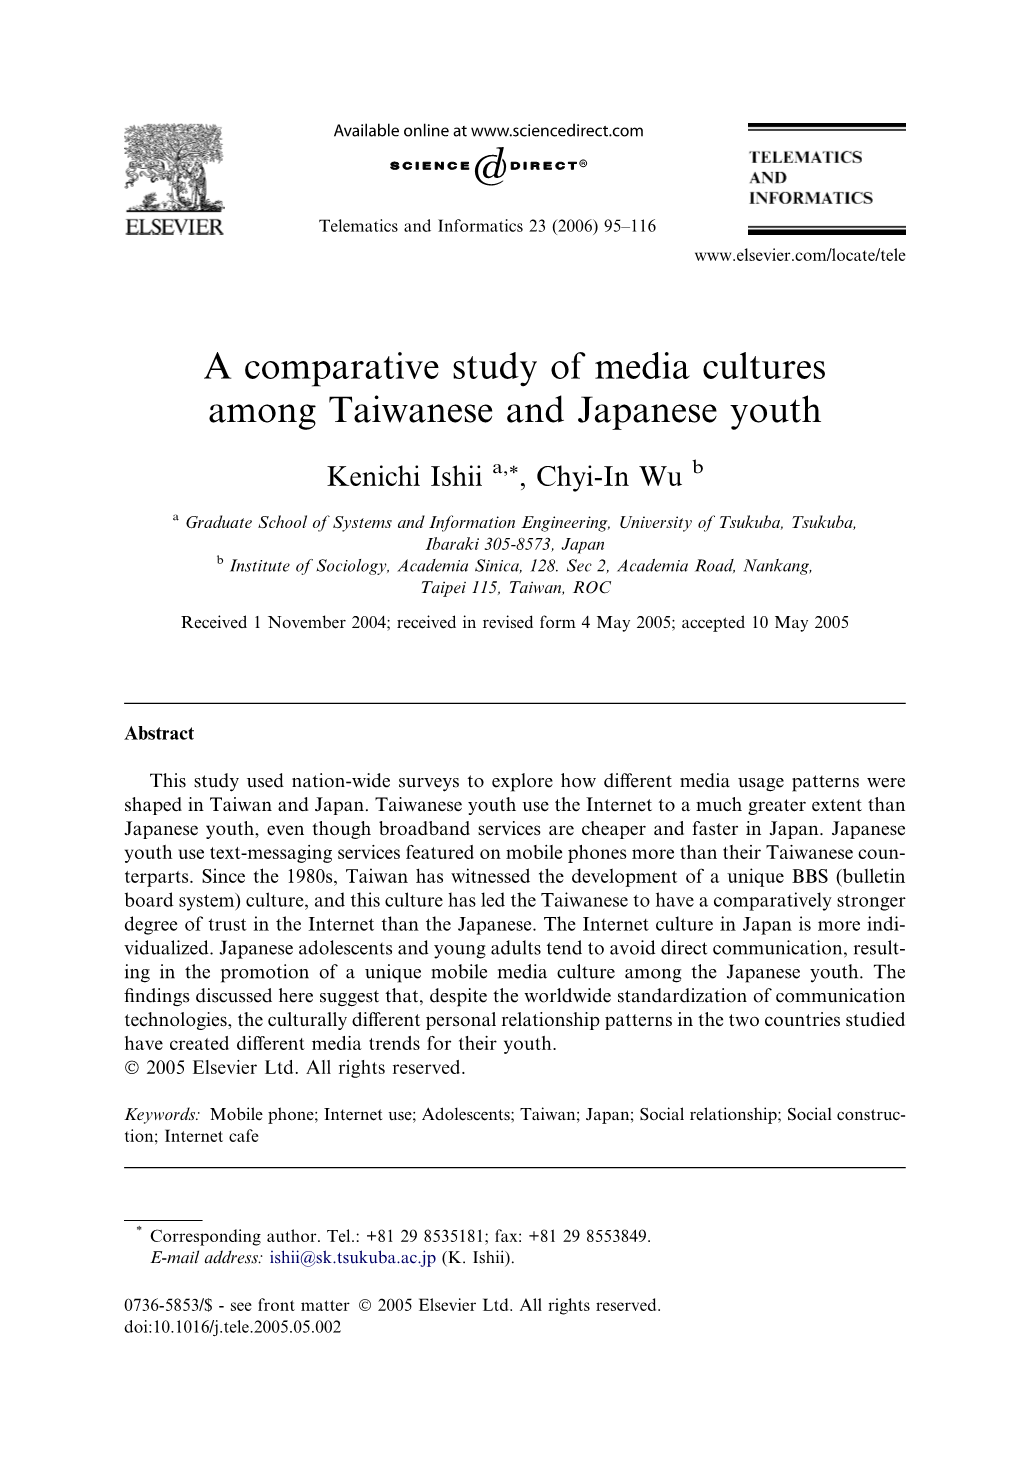 A Comparative Study of Media Cultures Among Taiwanese and Japanese Youth